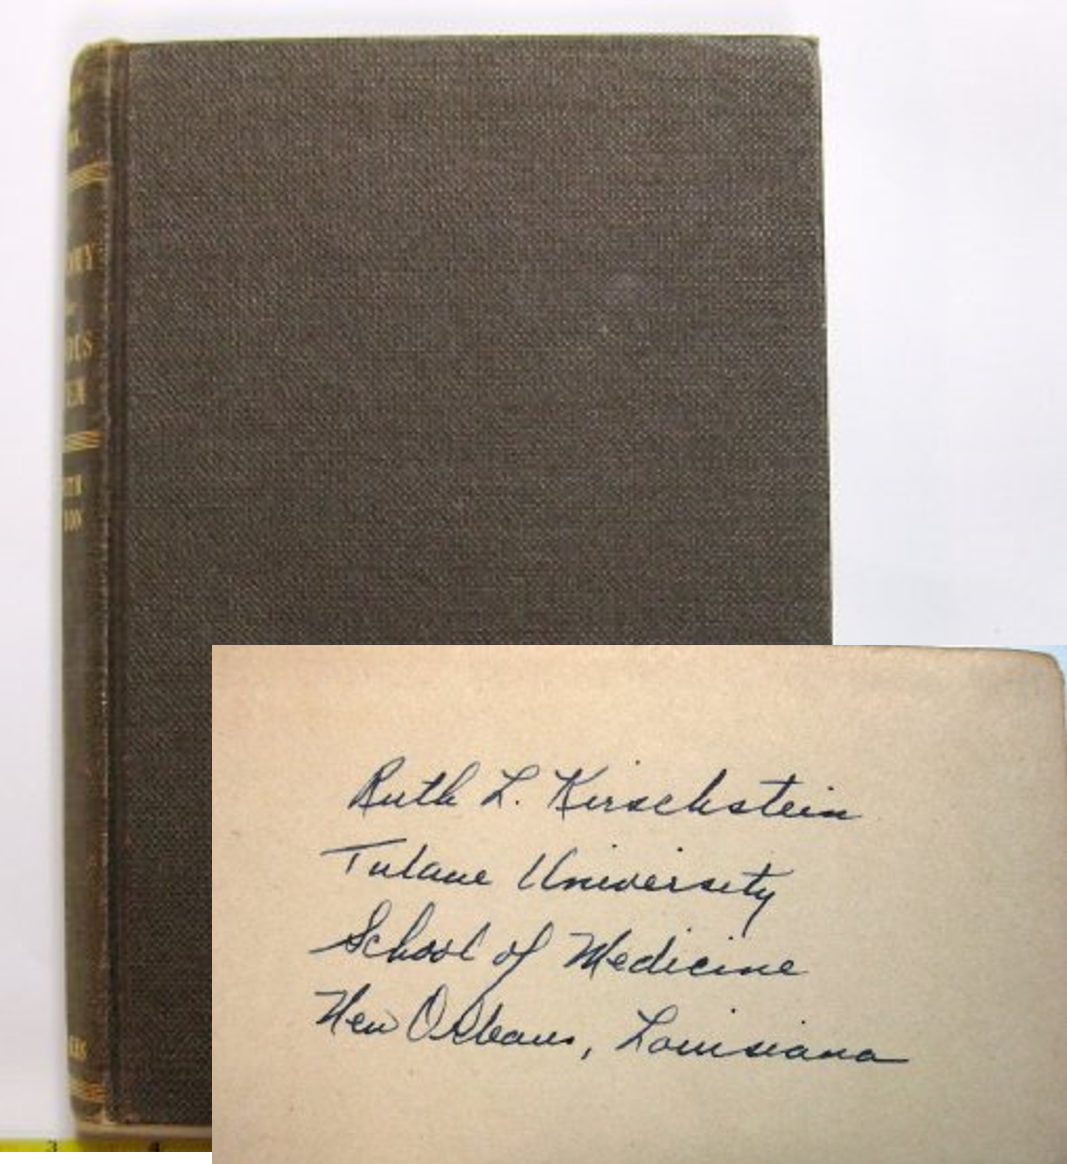 Image of Ruth Kirschstein's copy of the book Anatomy of the Nervous System. Light green book cover with her name and Tulane University School of Medicine New Orleans, Louisiana written on the inside cover of the book.